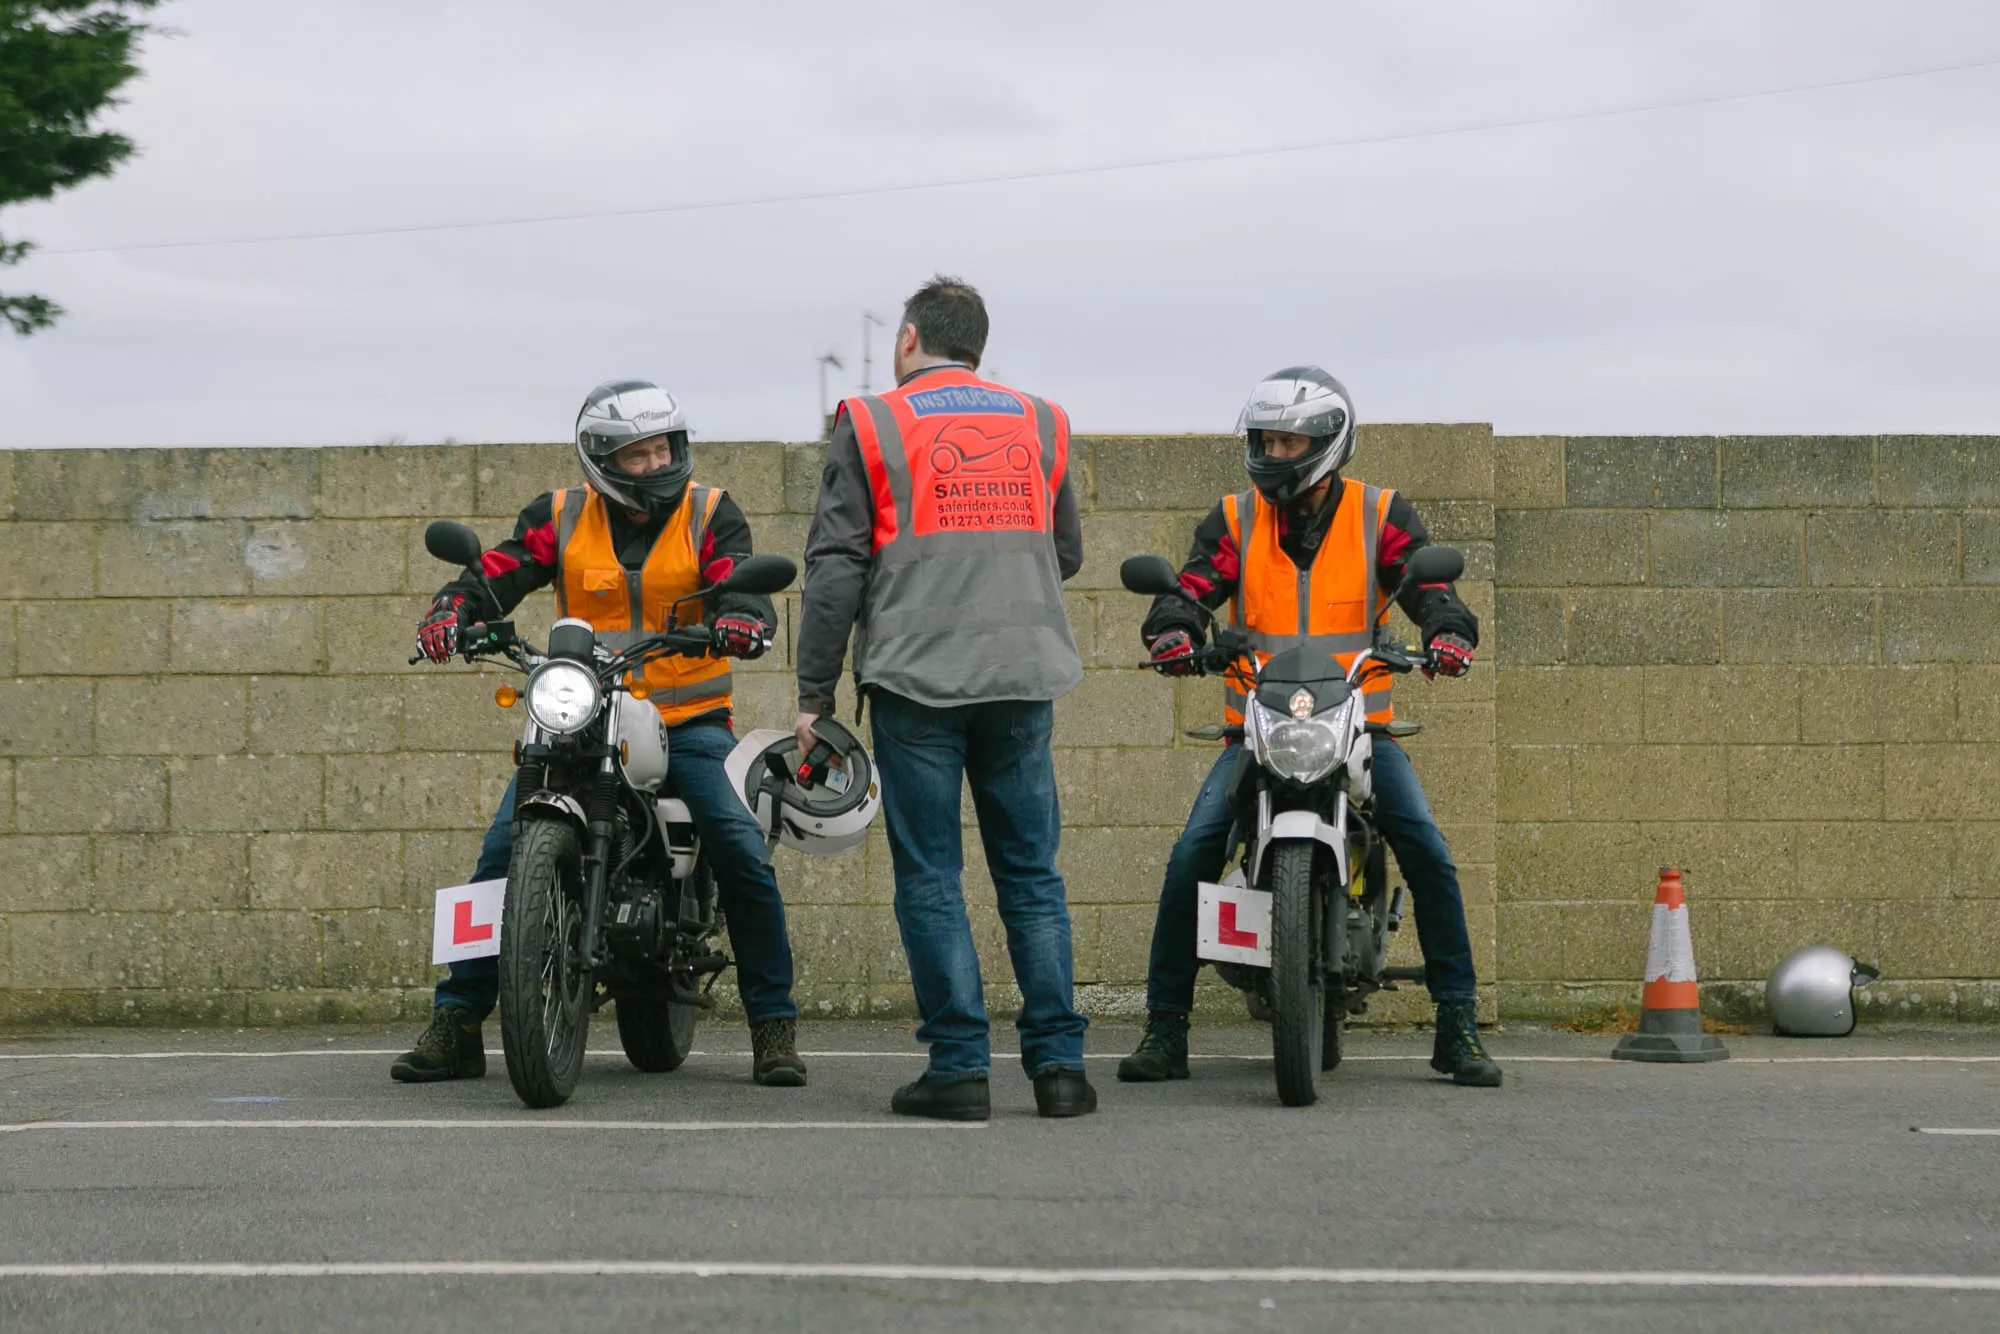 Saferide Motorcycle & Scooter Training in United Kingdom, Europe | Motorcycles - Rated 4.3